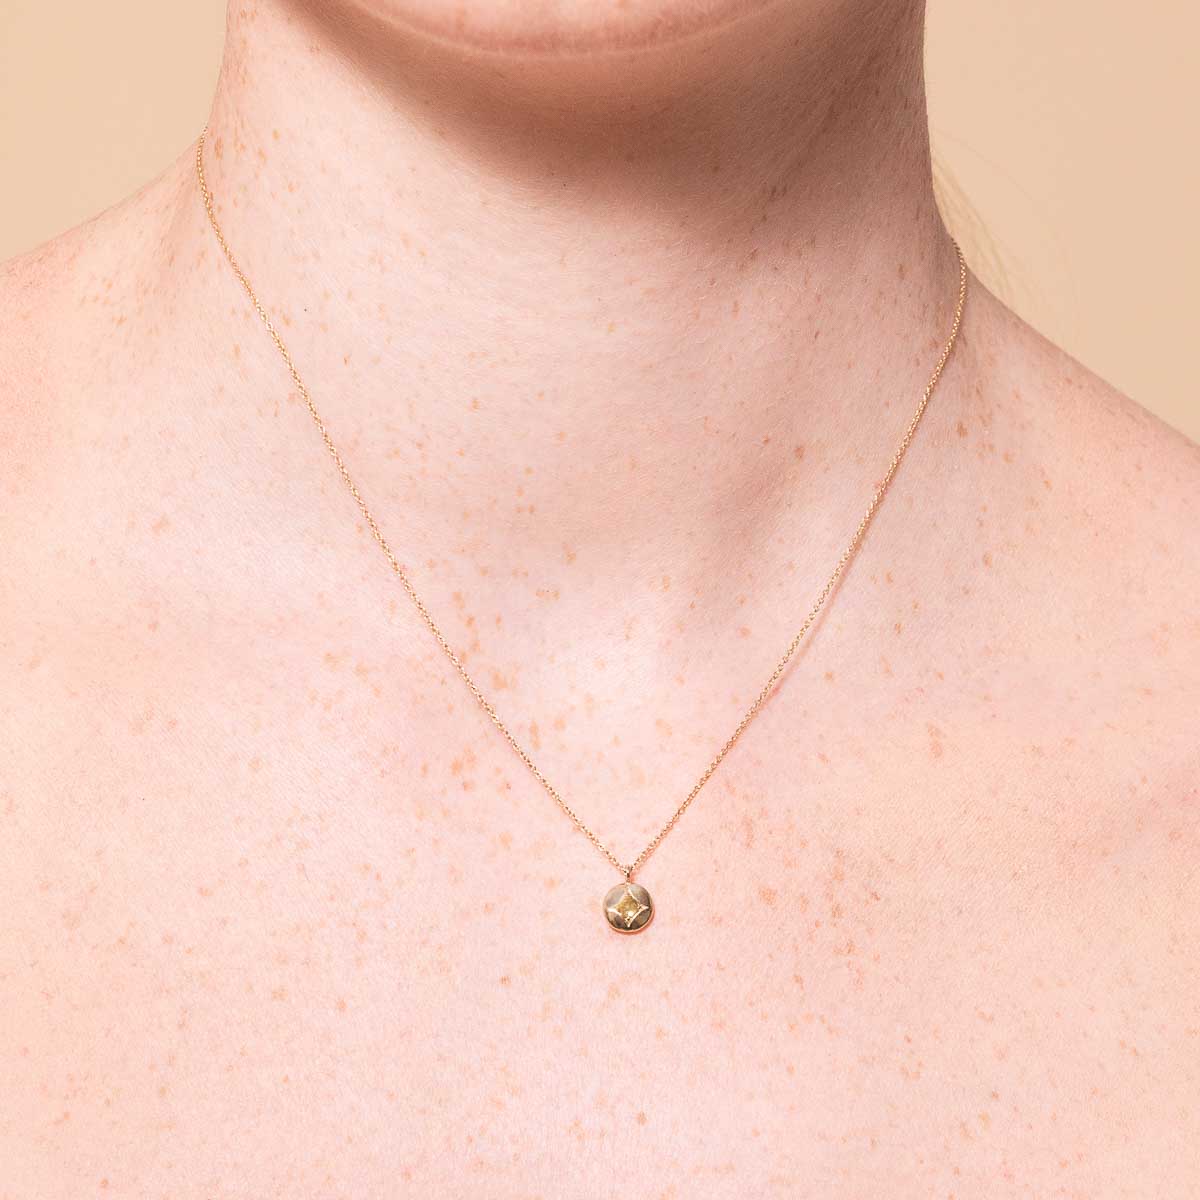 August Peridot Birthstone Necklace in Solid Gold